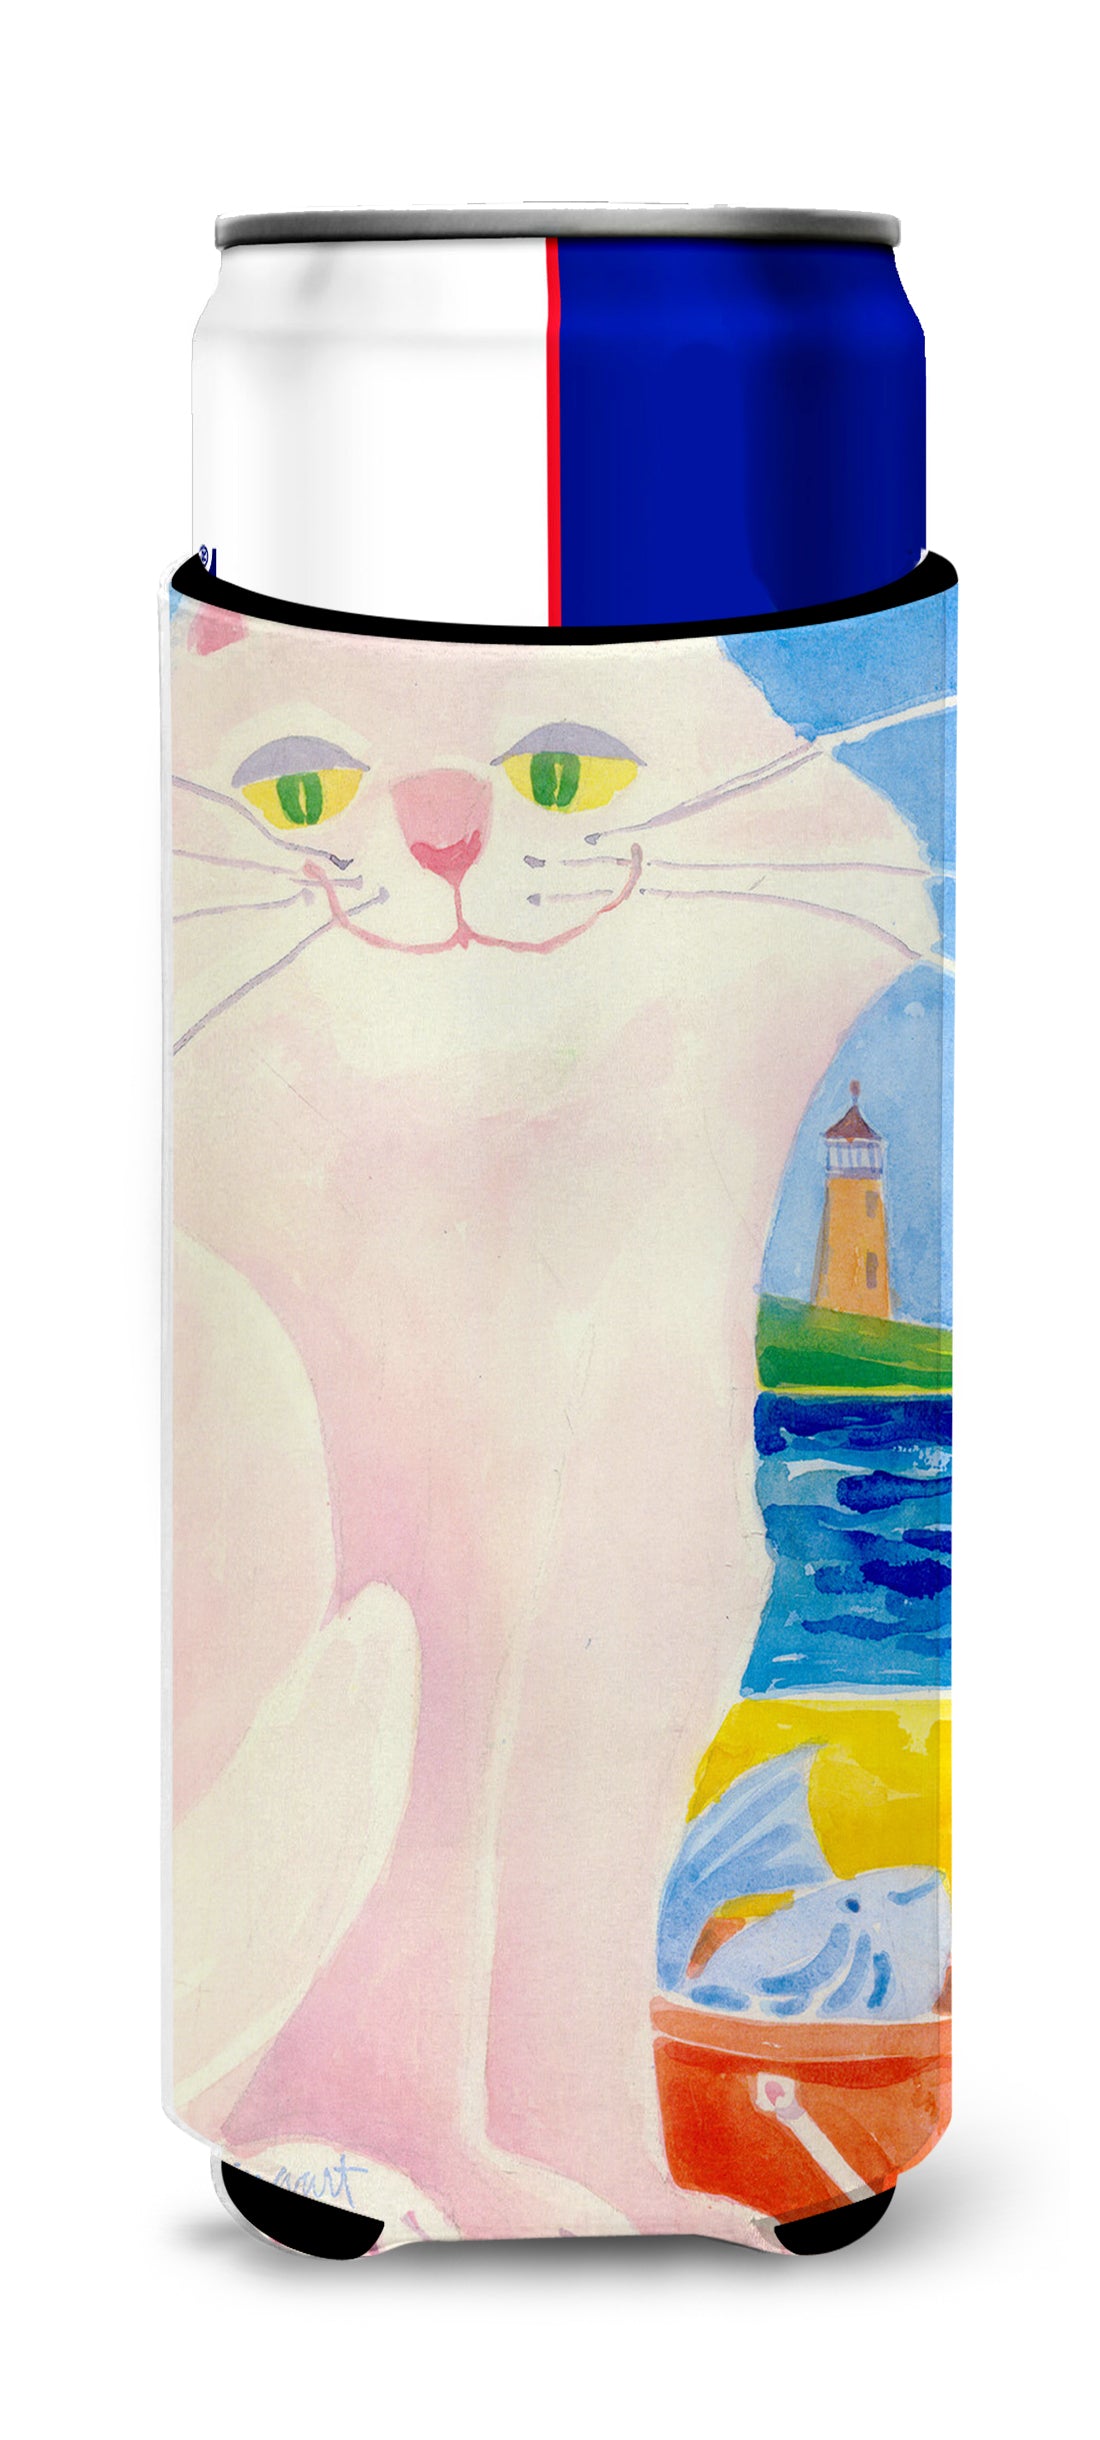 Big white Cat at the beach Ultra Beverage Insulators for slim cans 6018MUK